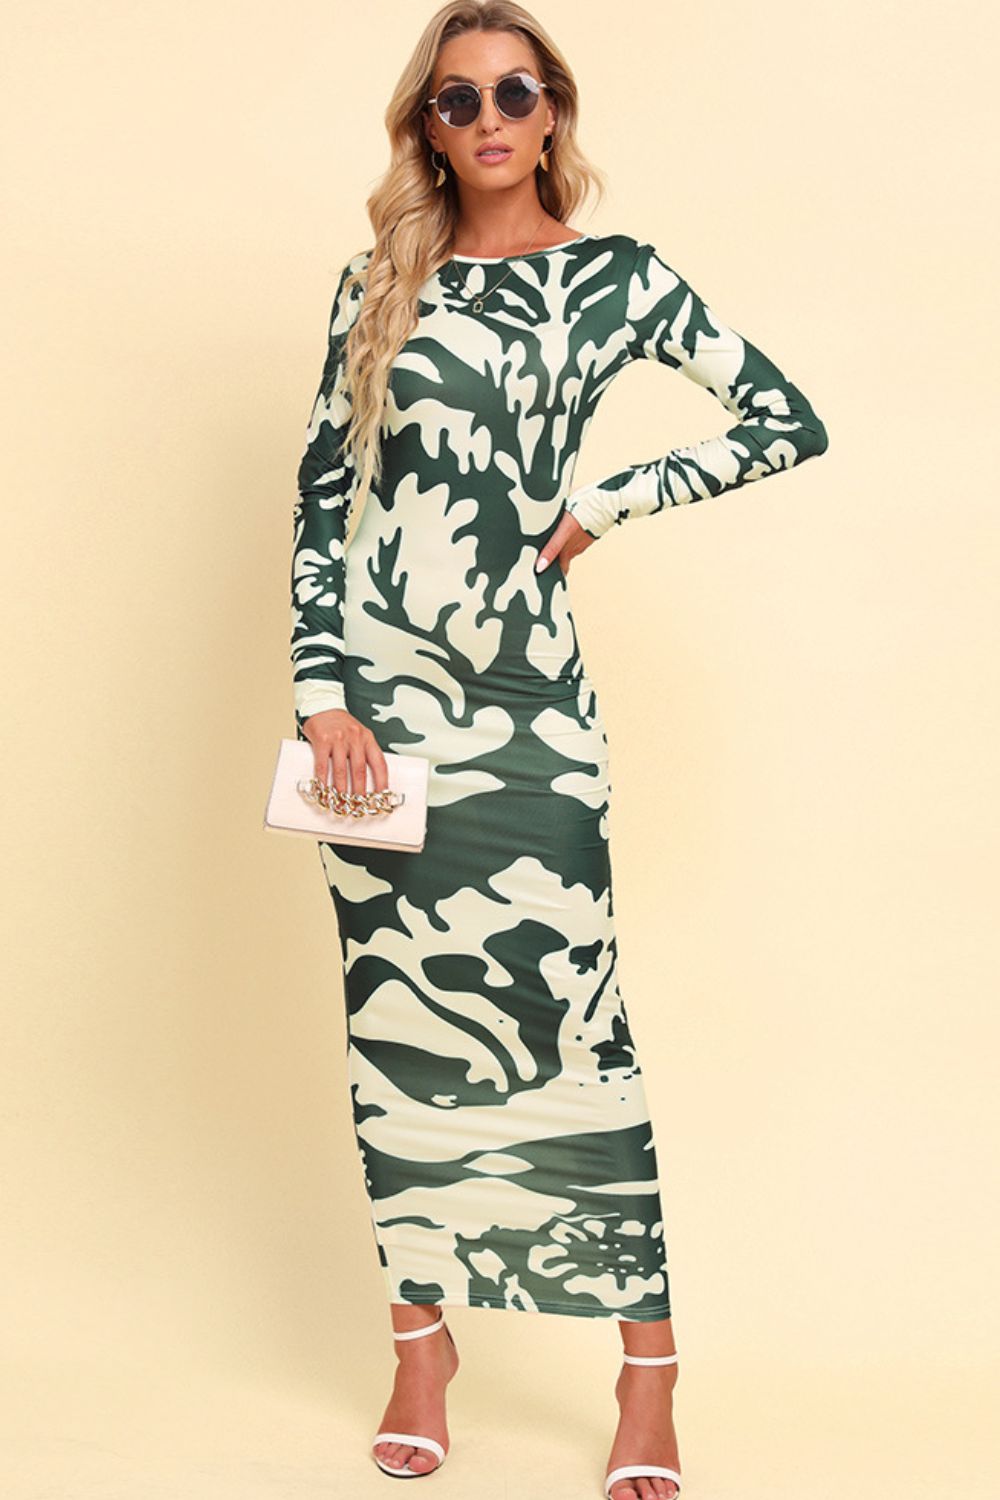 GREEN CAMOUFLAGE Printed Backless Long Sleeve Maxi Dress - women's dress at TFC&H Co.